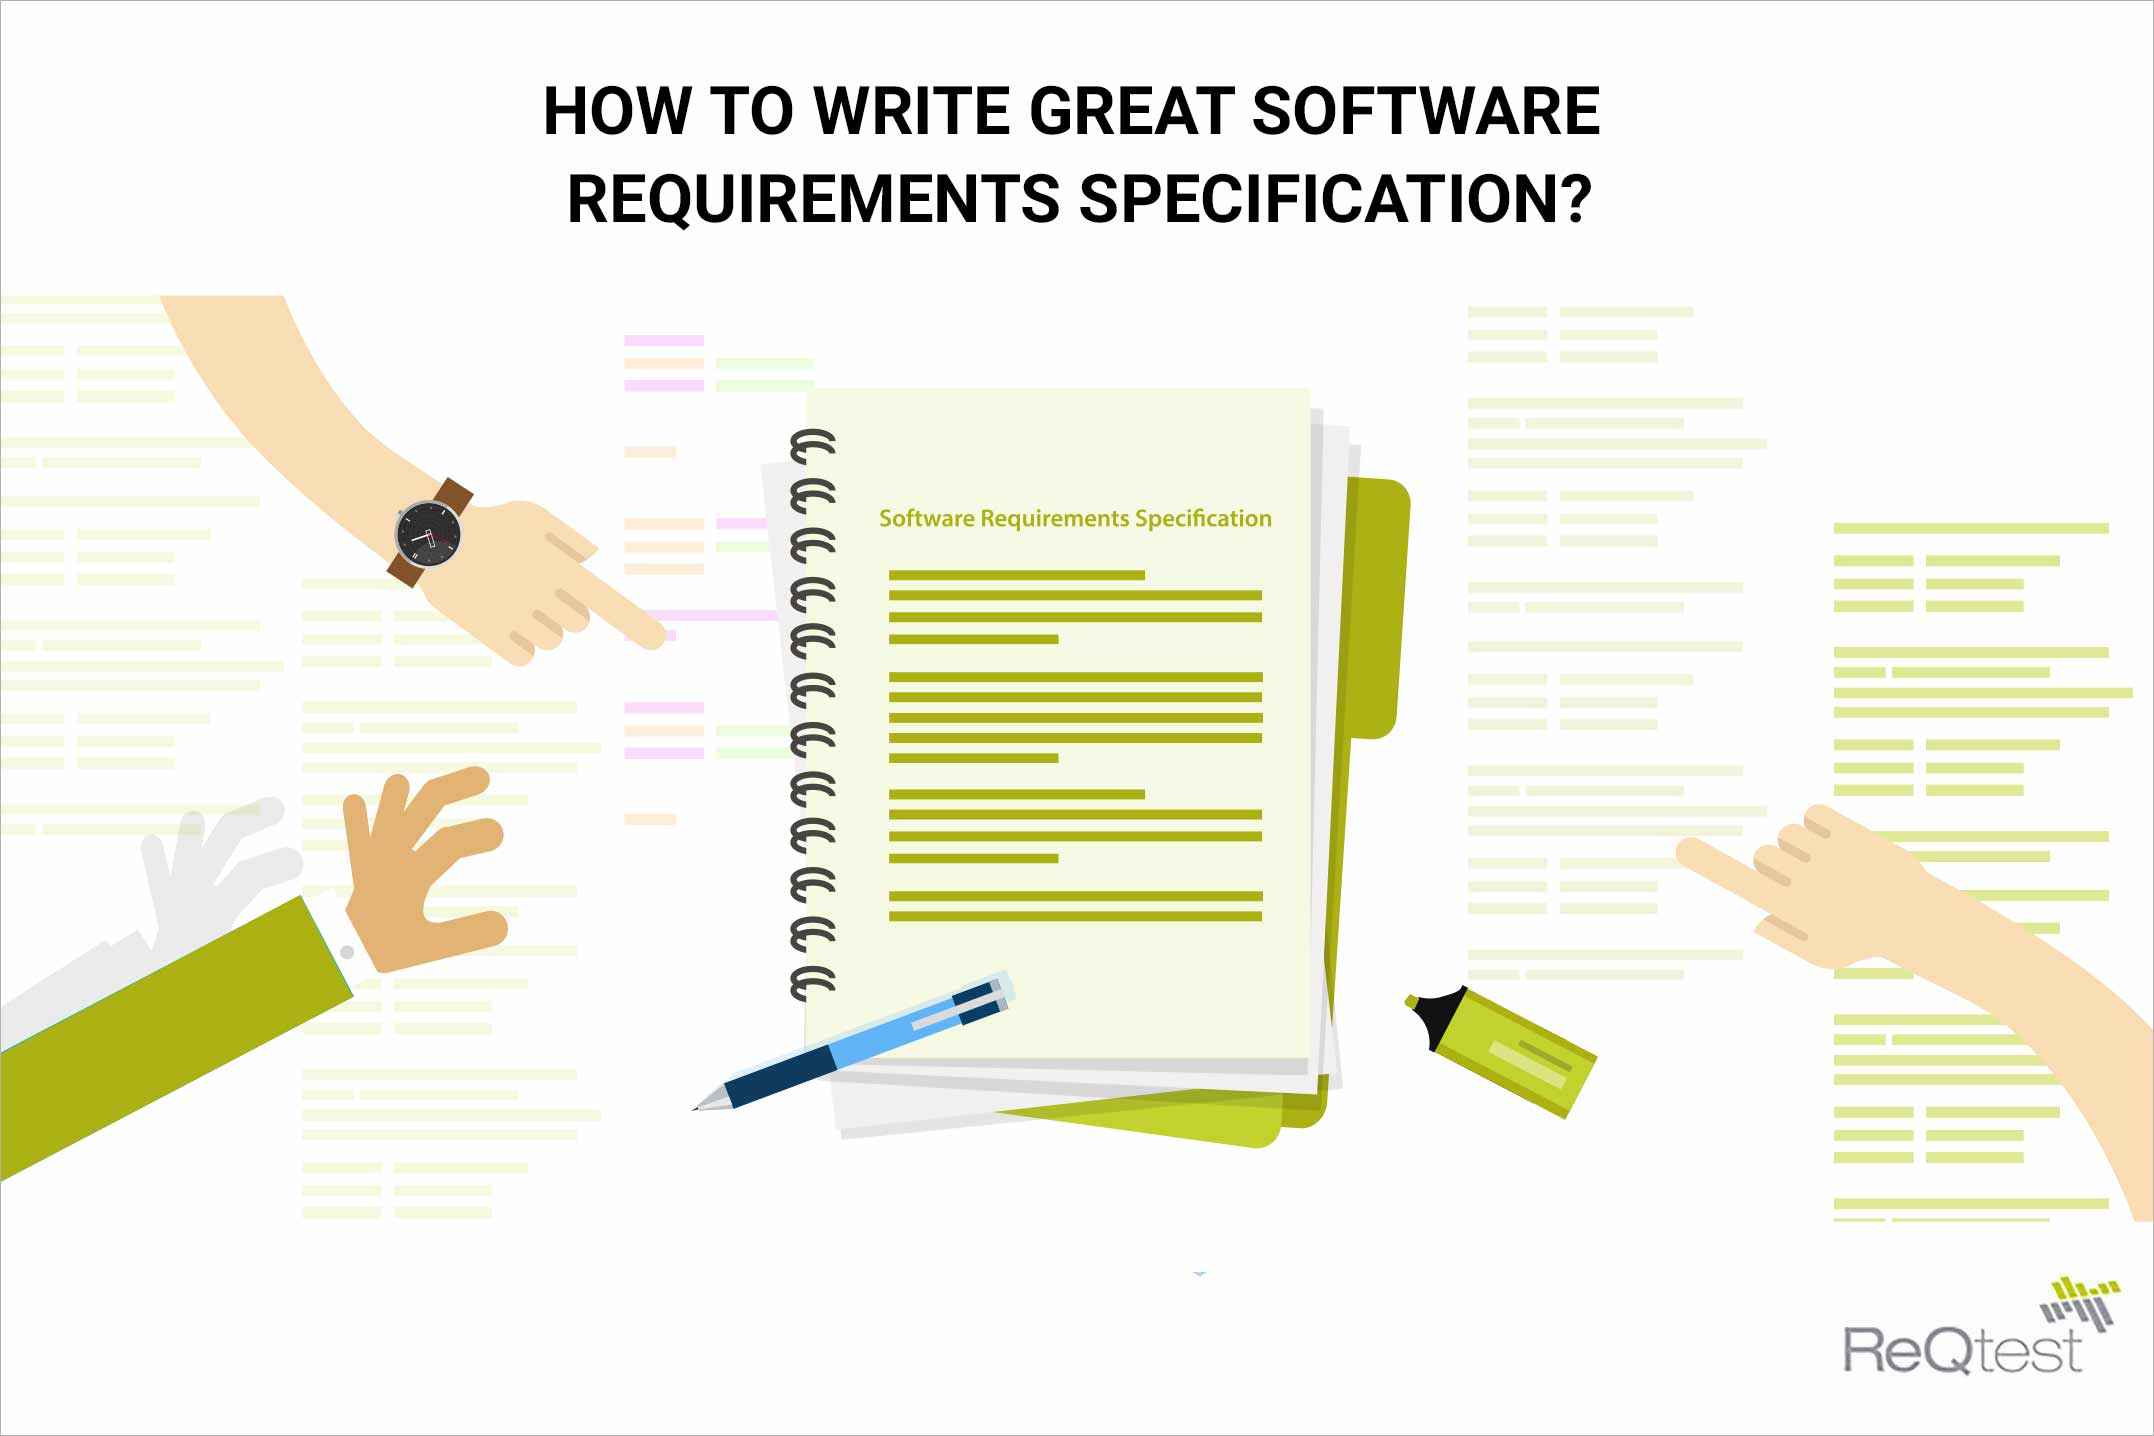 Software requirements specification